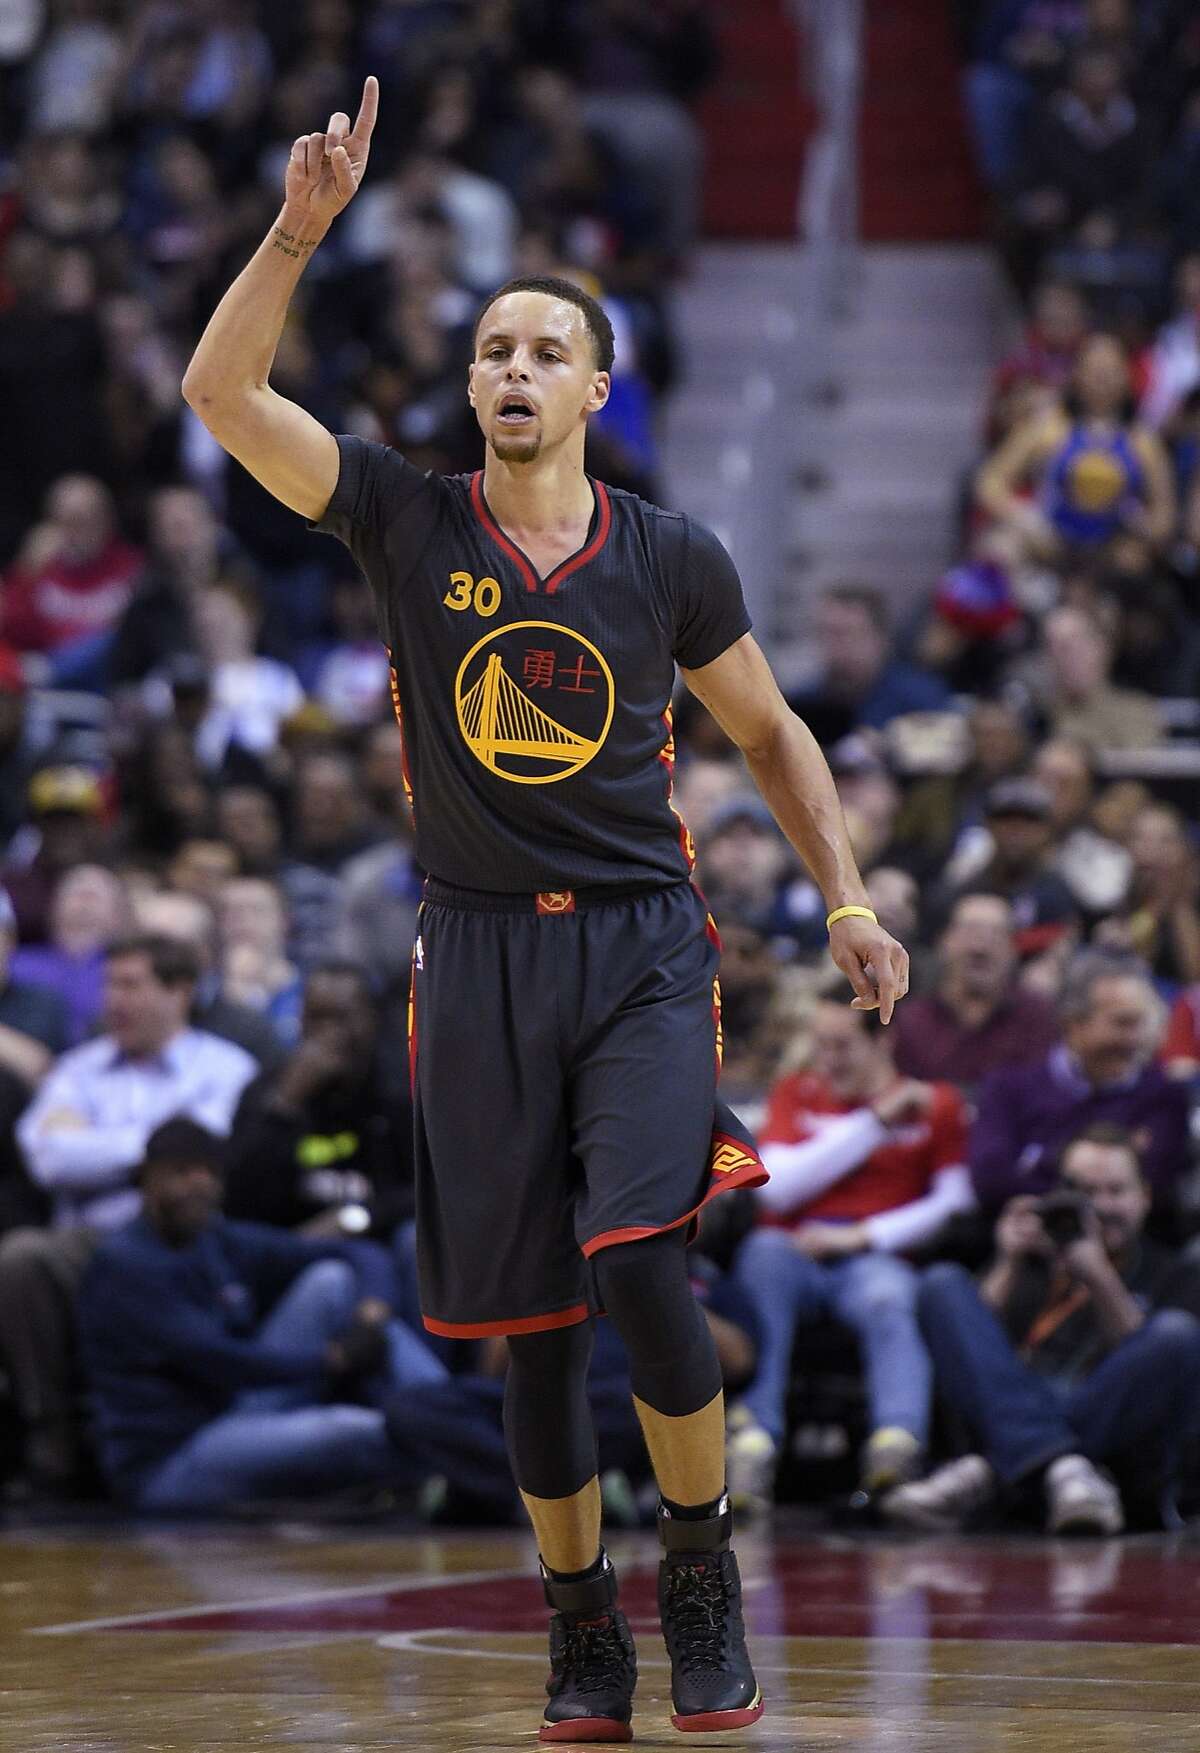 Golden State Warriors guard Stephen Curry (30) gestures after he scored during the first half of an NBA basketball game against the Washington Wizards, Tuesday, Feb. 24, 2015, in Washington. (AP Photo/Nick Wass)